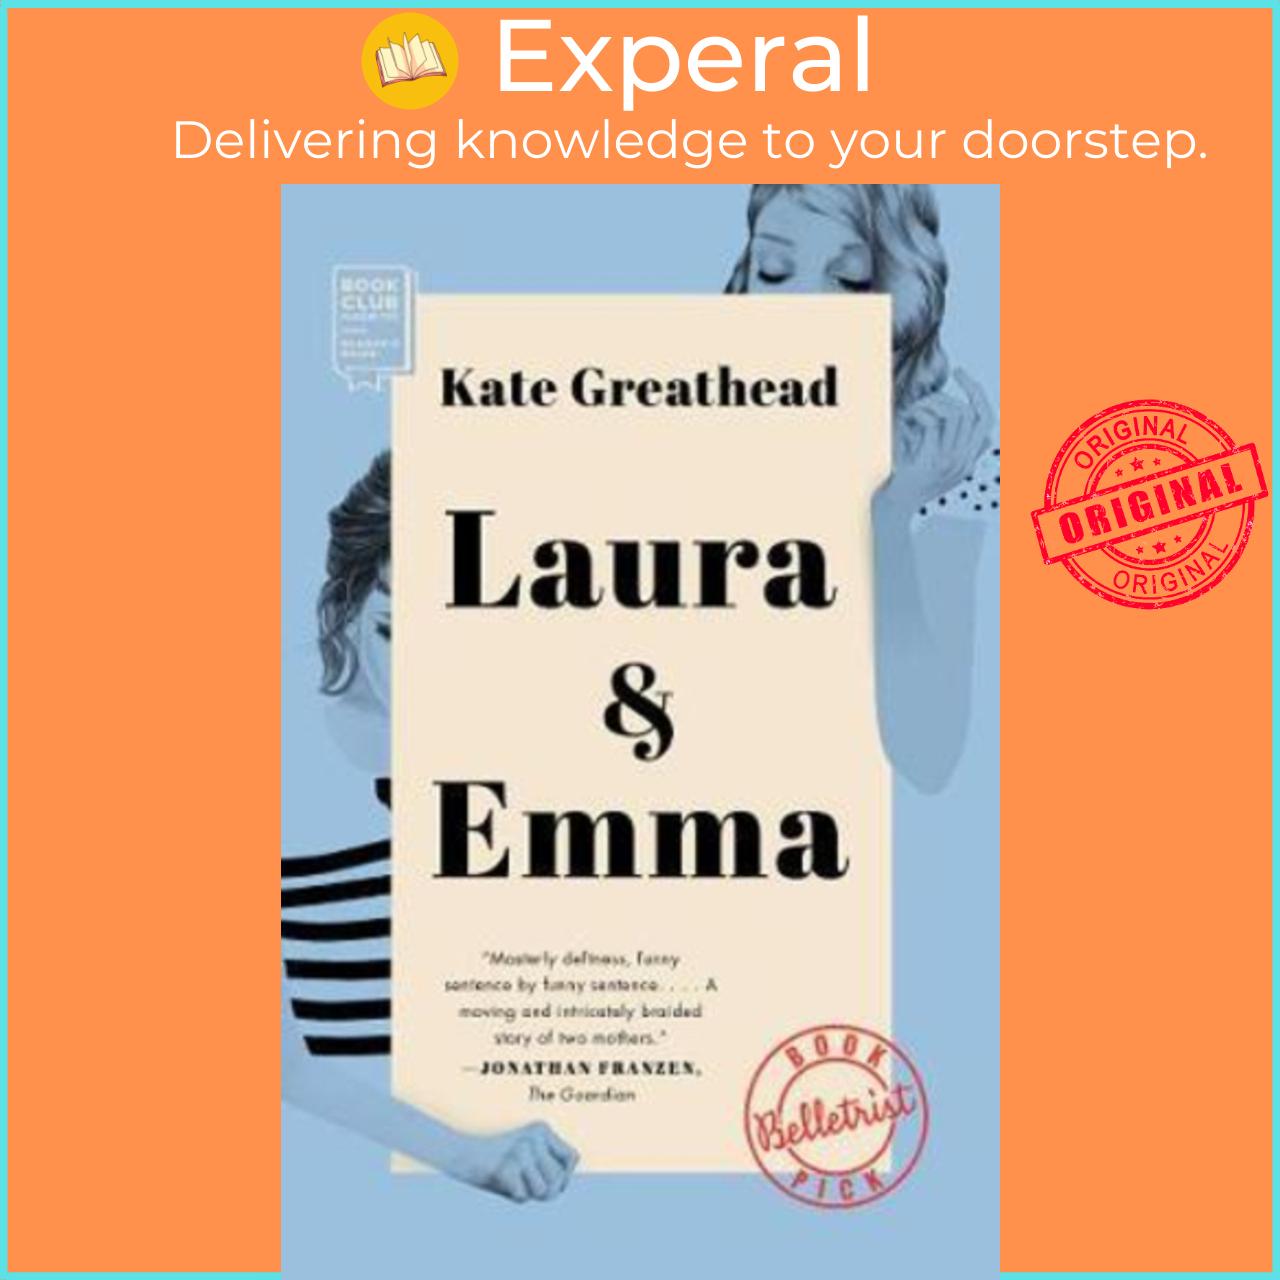 Sách - Laura & Emma by Kate Greathead (US edition, paperback)